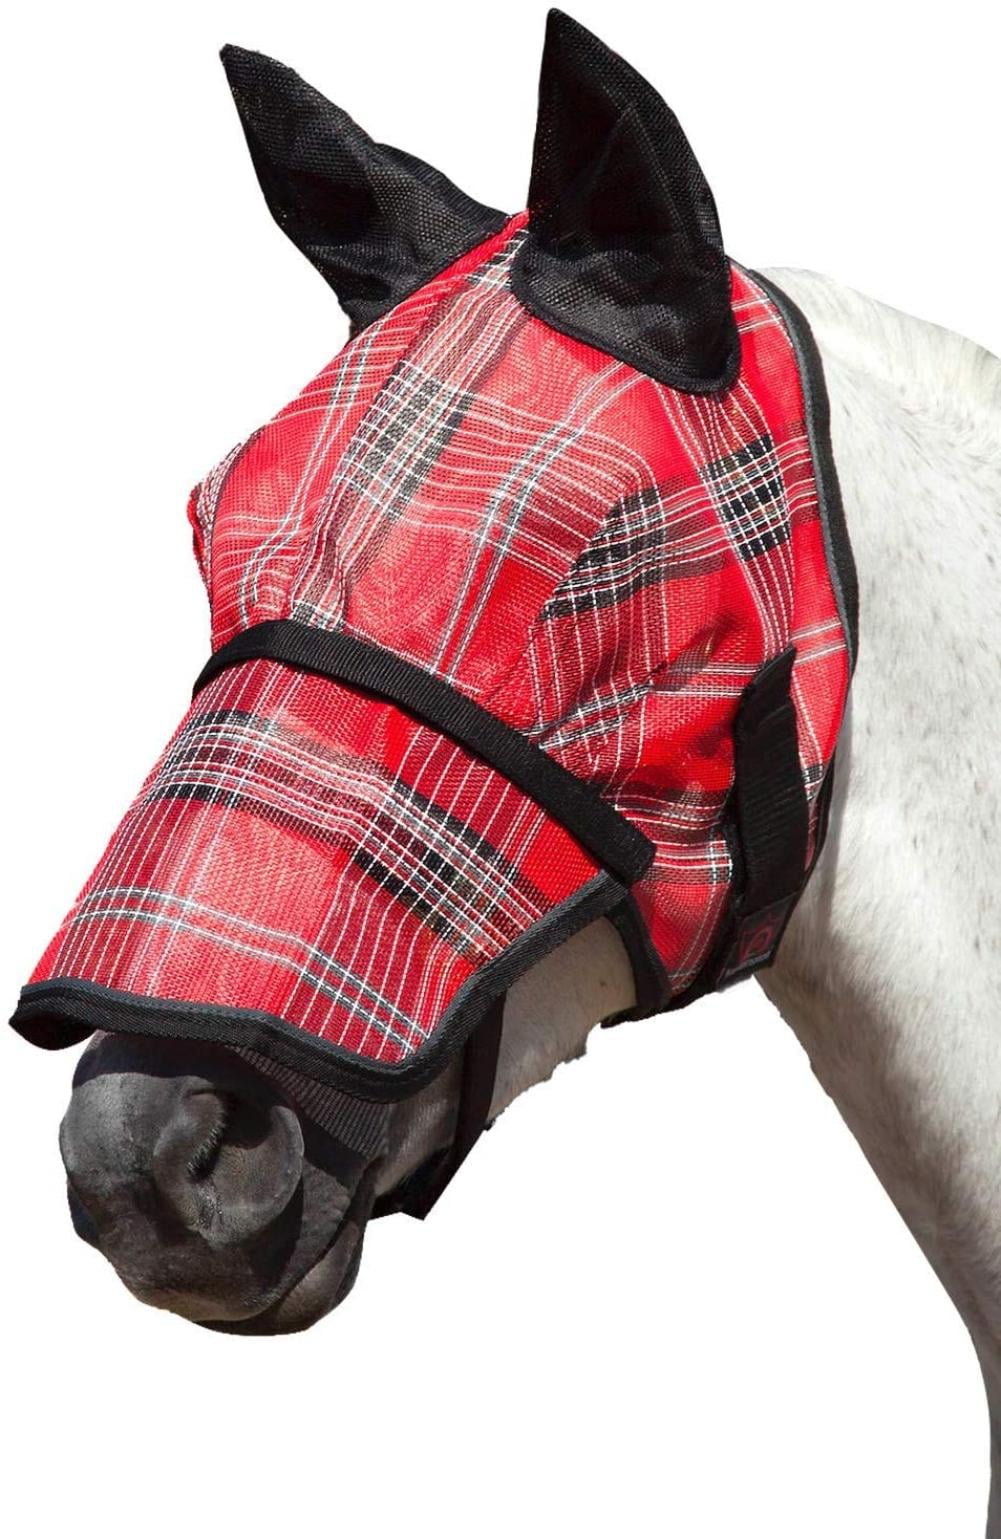 Nose and Ears from Biting Insects and UV Rays While Allowing Full Visibility Kensington Signature Fly Mask with Soft Mesh Ears Protects Horses Face 